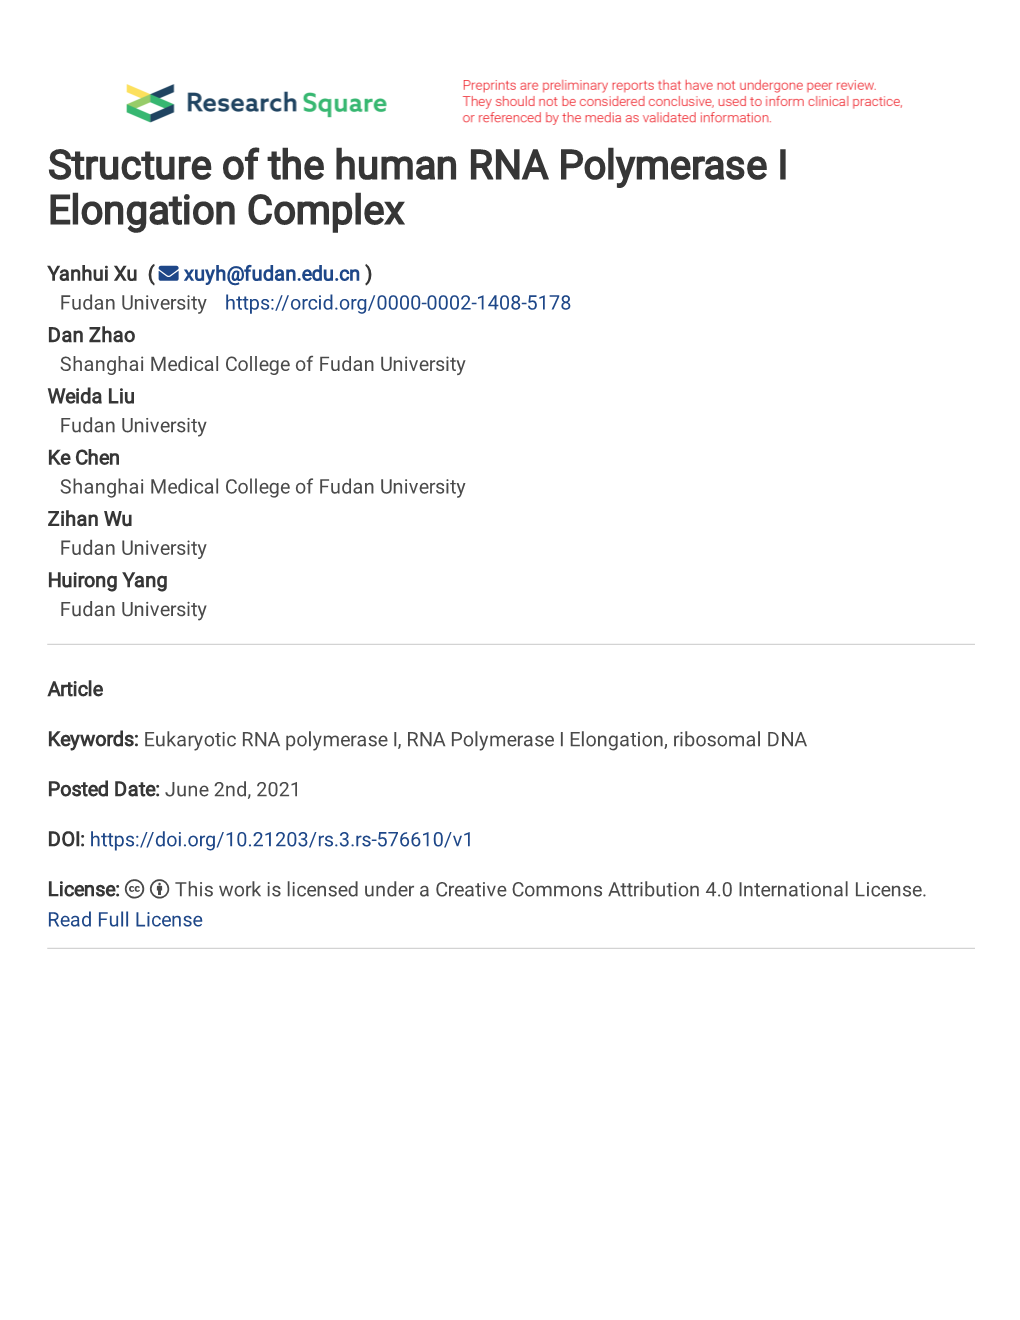 Structure of the Human RNA Polymerase I Elongation Complex